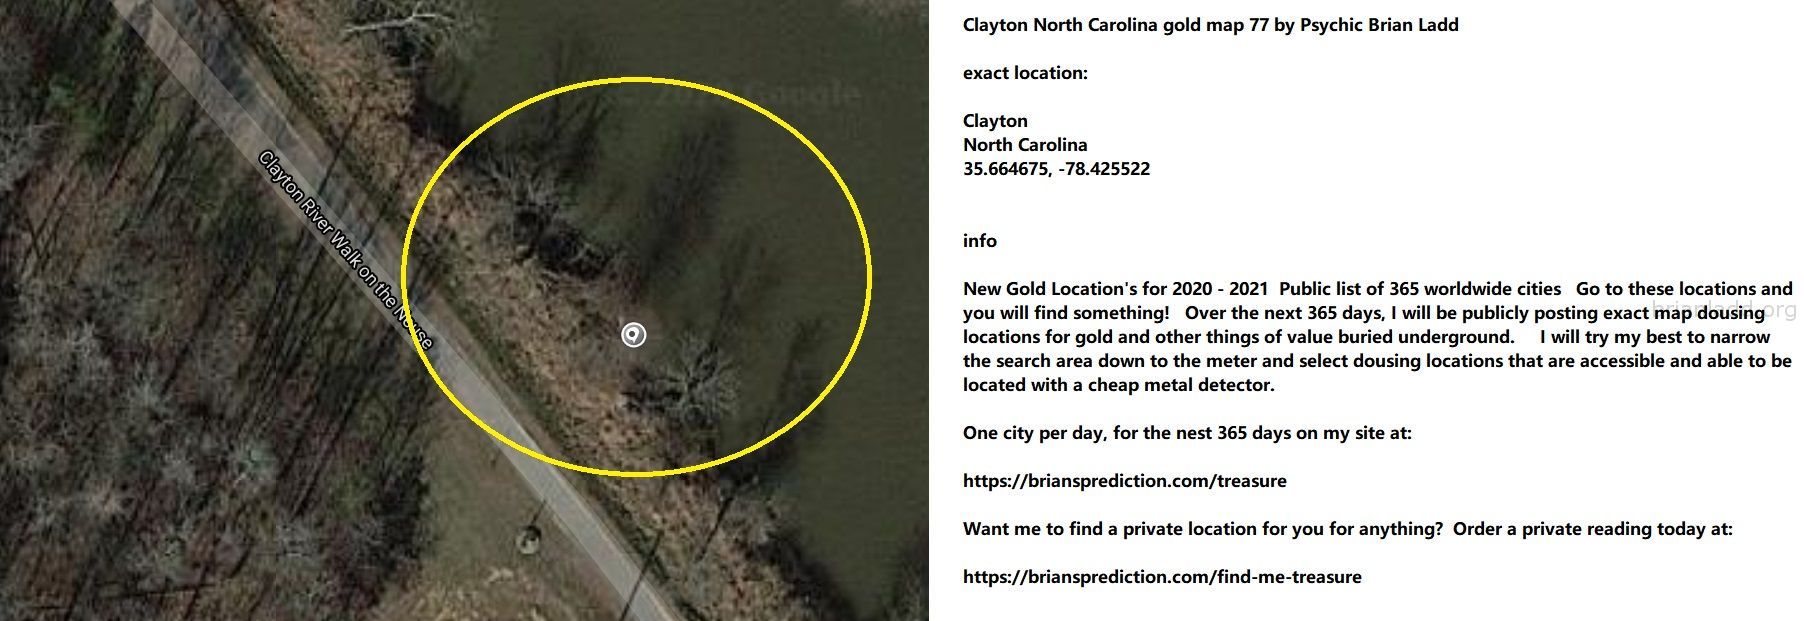 Clayton North Carolina gold map 77 by Psychic Brian Ladd
New Gold Location's for 2020 - 2021  Public list of 365 worldwide cities   Go to these locations and you will find something!   Over the next 365 days, I will be publicly posting exact map dousing locations for gold and other things of value buried underground.     I will try my best to narrow the search area down to the meter and select dousing locations that are accessible and able to be located with a cheap metal detector. One city per day, for the nest 365 days on my site at:  https://briansprediction.com/treasure  Want me to find a private location for you for anything?  Order a private reading today at:  https://briansprediction.com/find-me-treasure
